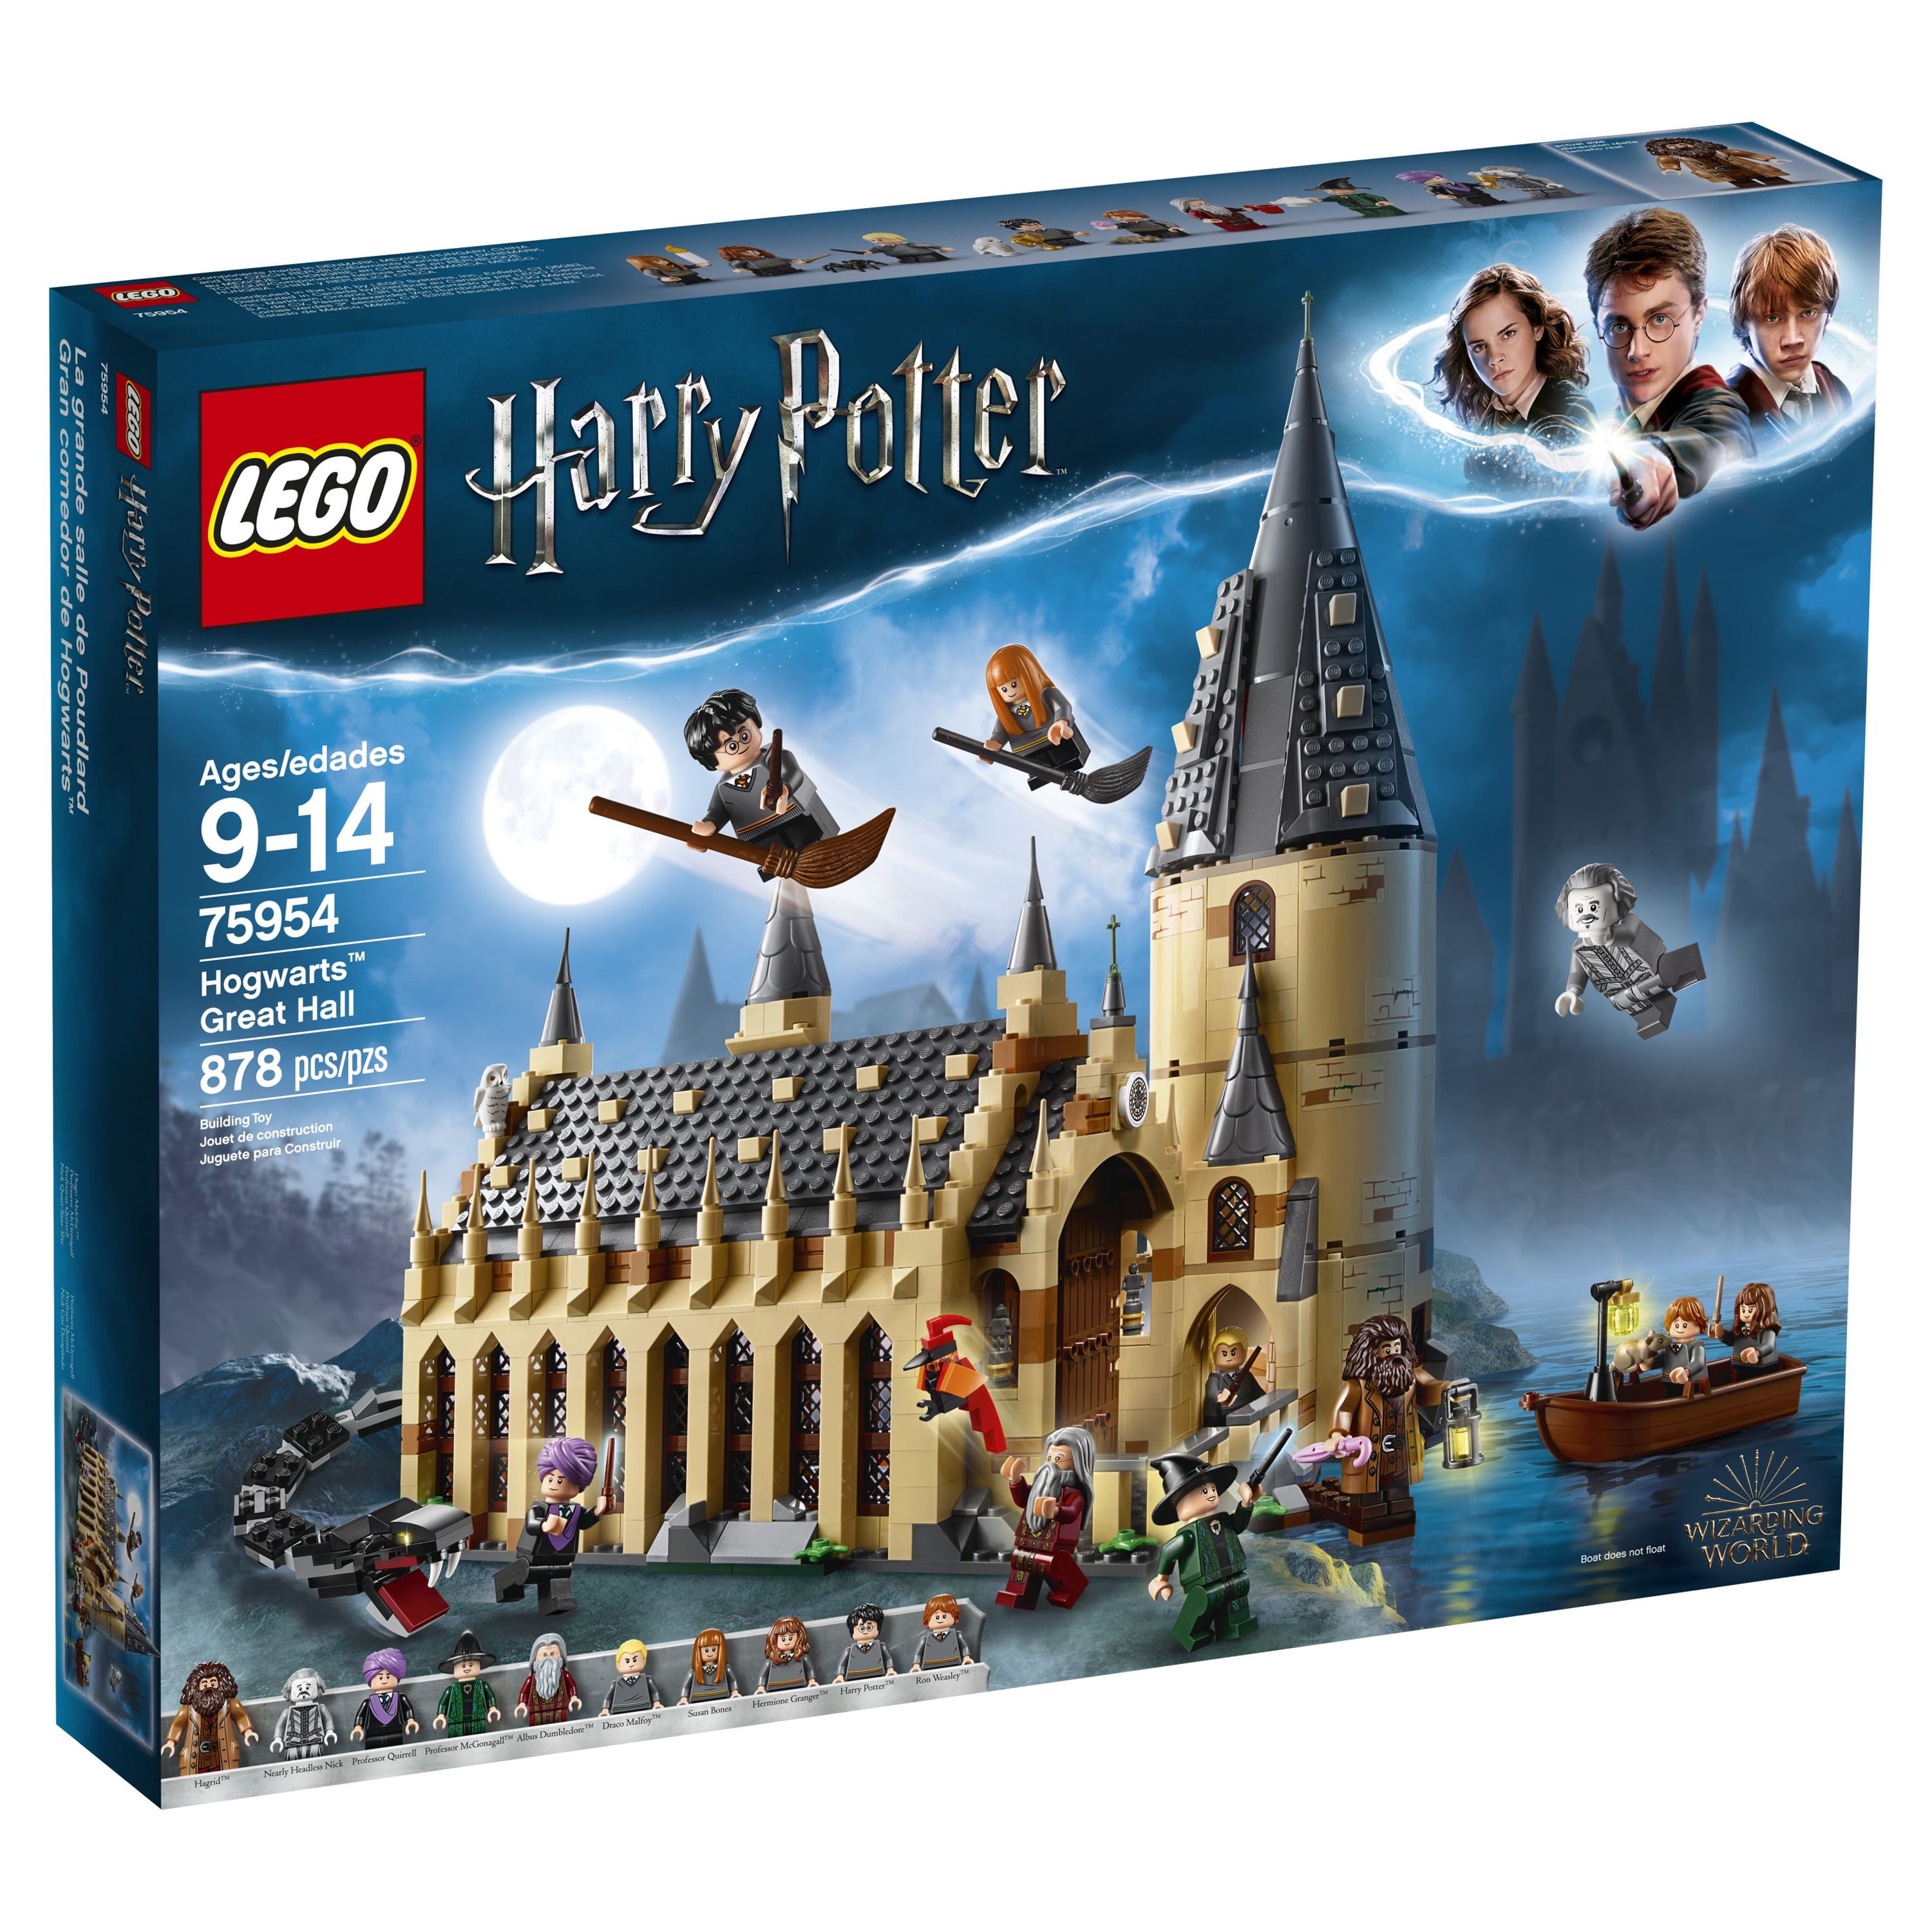 LEGO Harry Potter Hogwarts Great Hall 75954 Toy of the Year 2019 - image 3 of 5